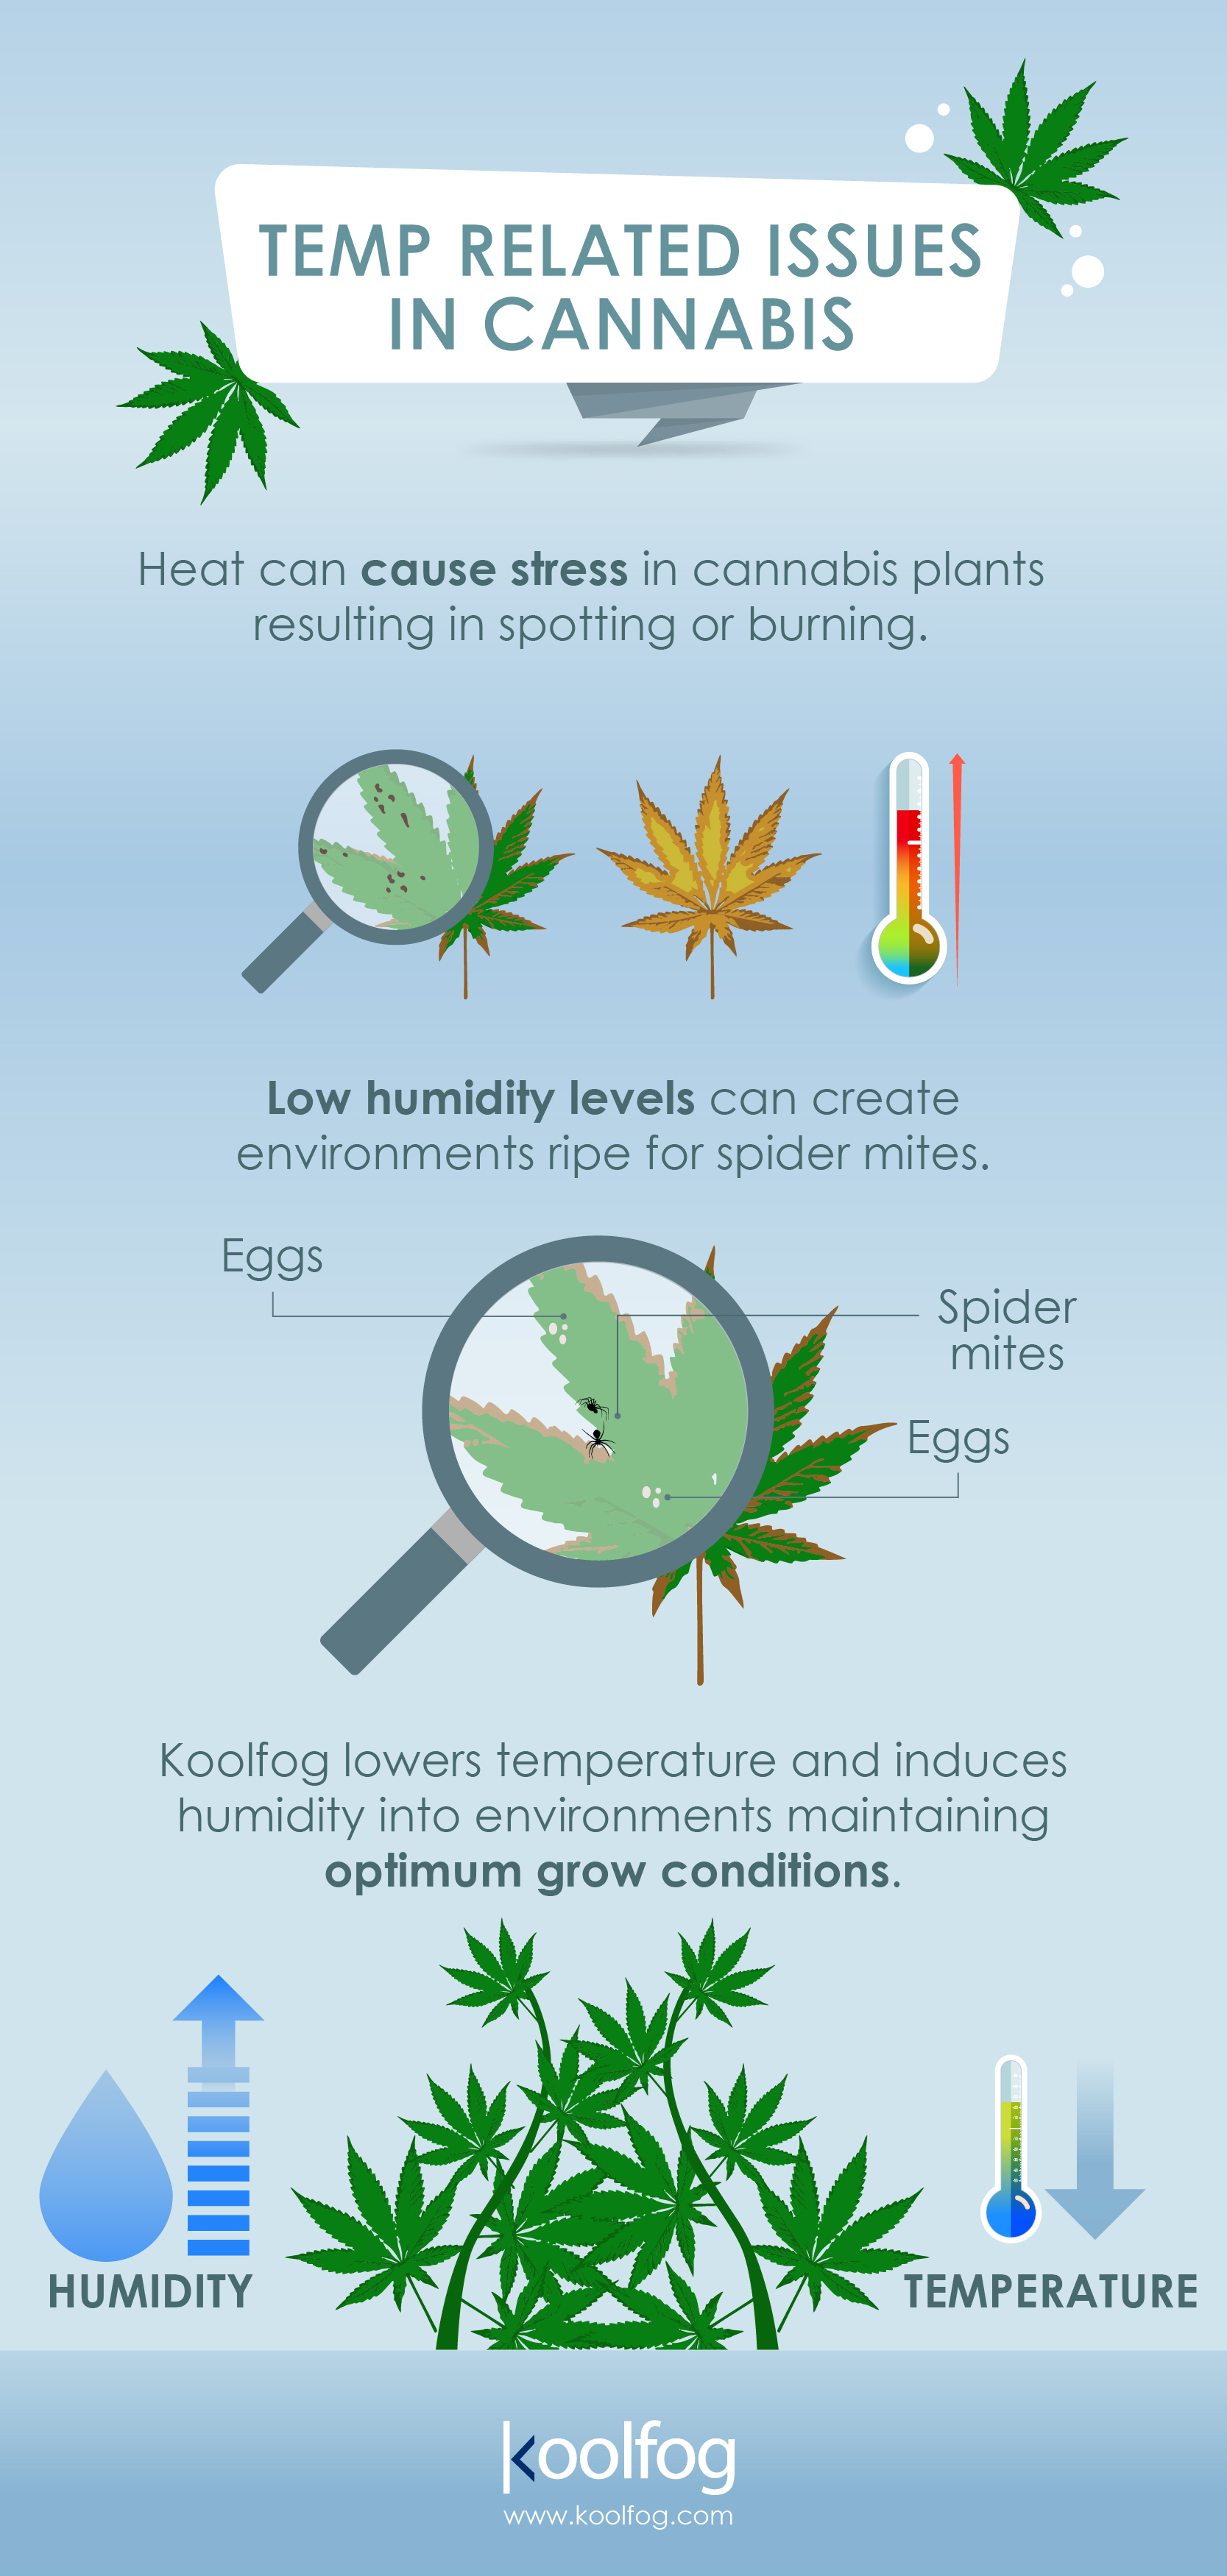 Ideal temperature for growing weed